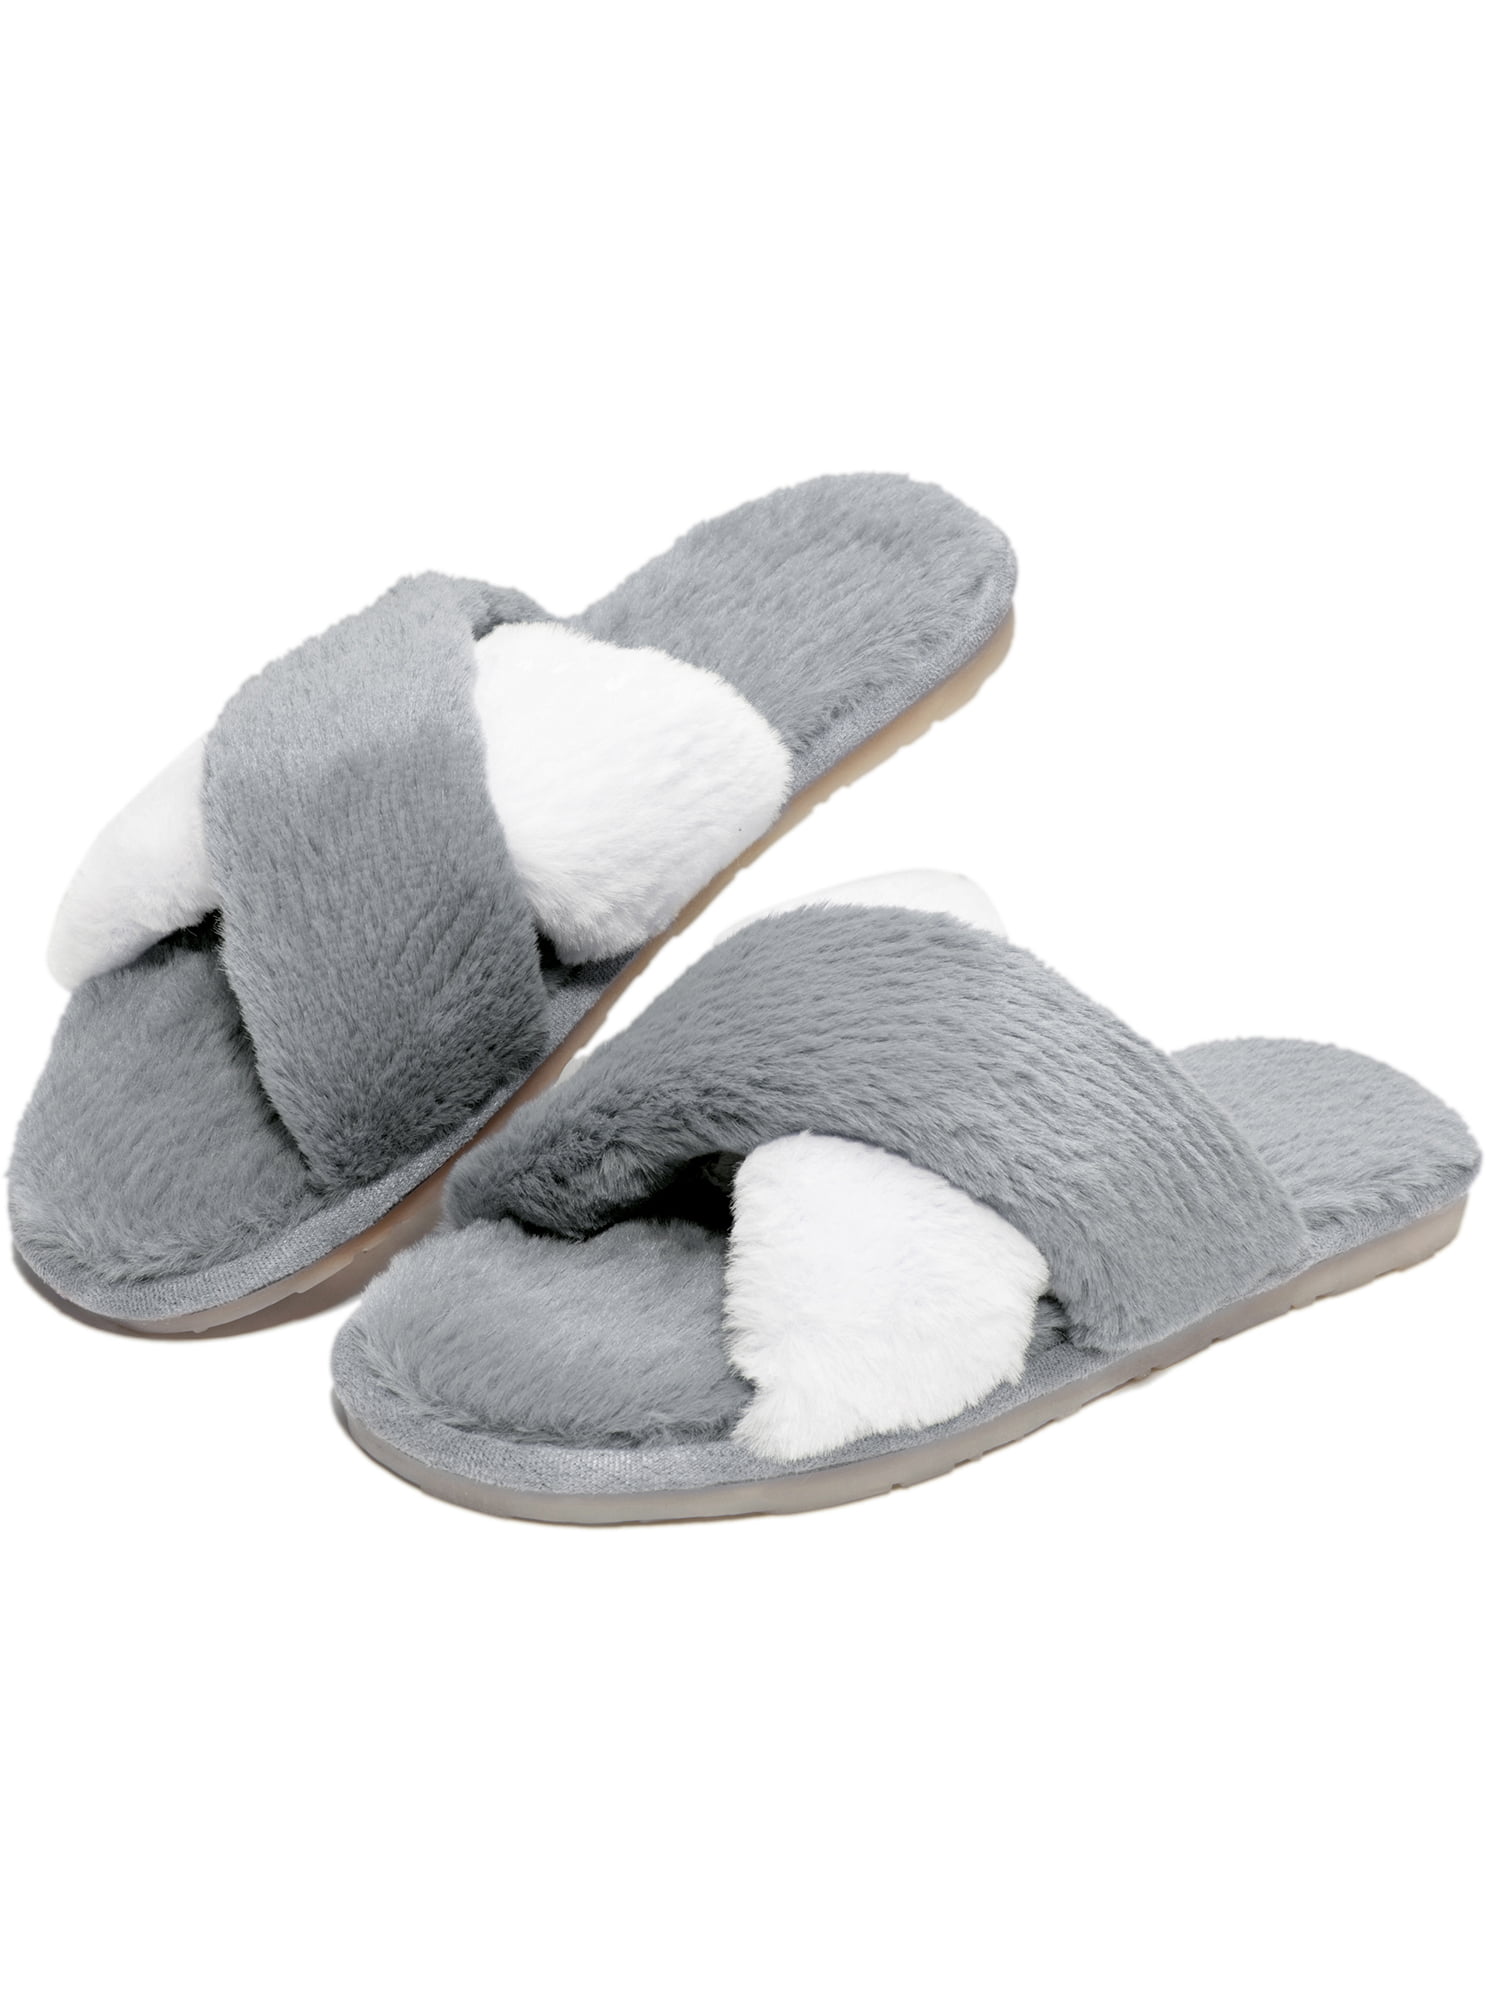 ONCAI Womens Fluffy Slides Faux Fur Criss Cross Fuzzy House Slippers Open Toe Yoga Mat Indoor Outdoor Flat Plush Sandals with Arch Support Size 3-9 